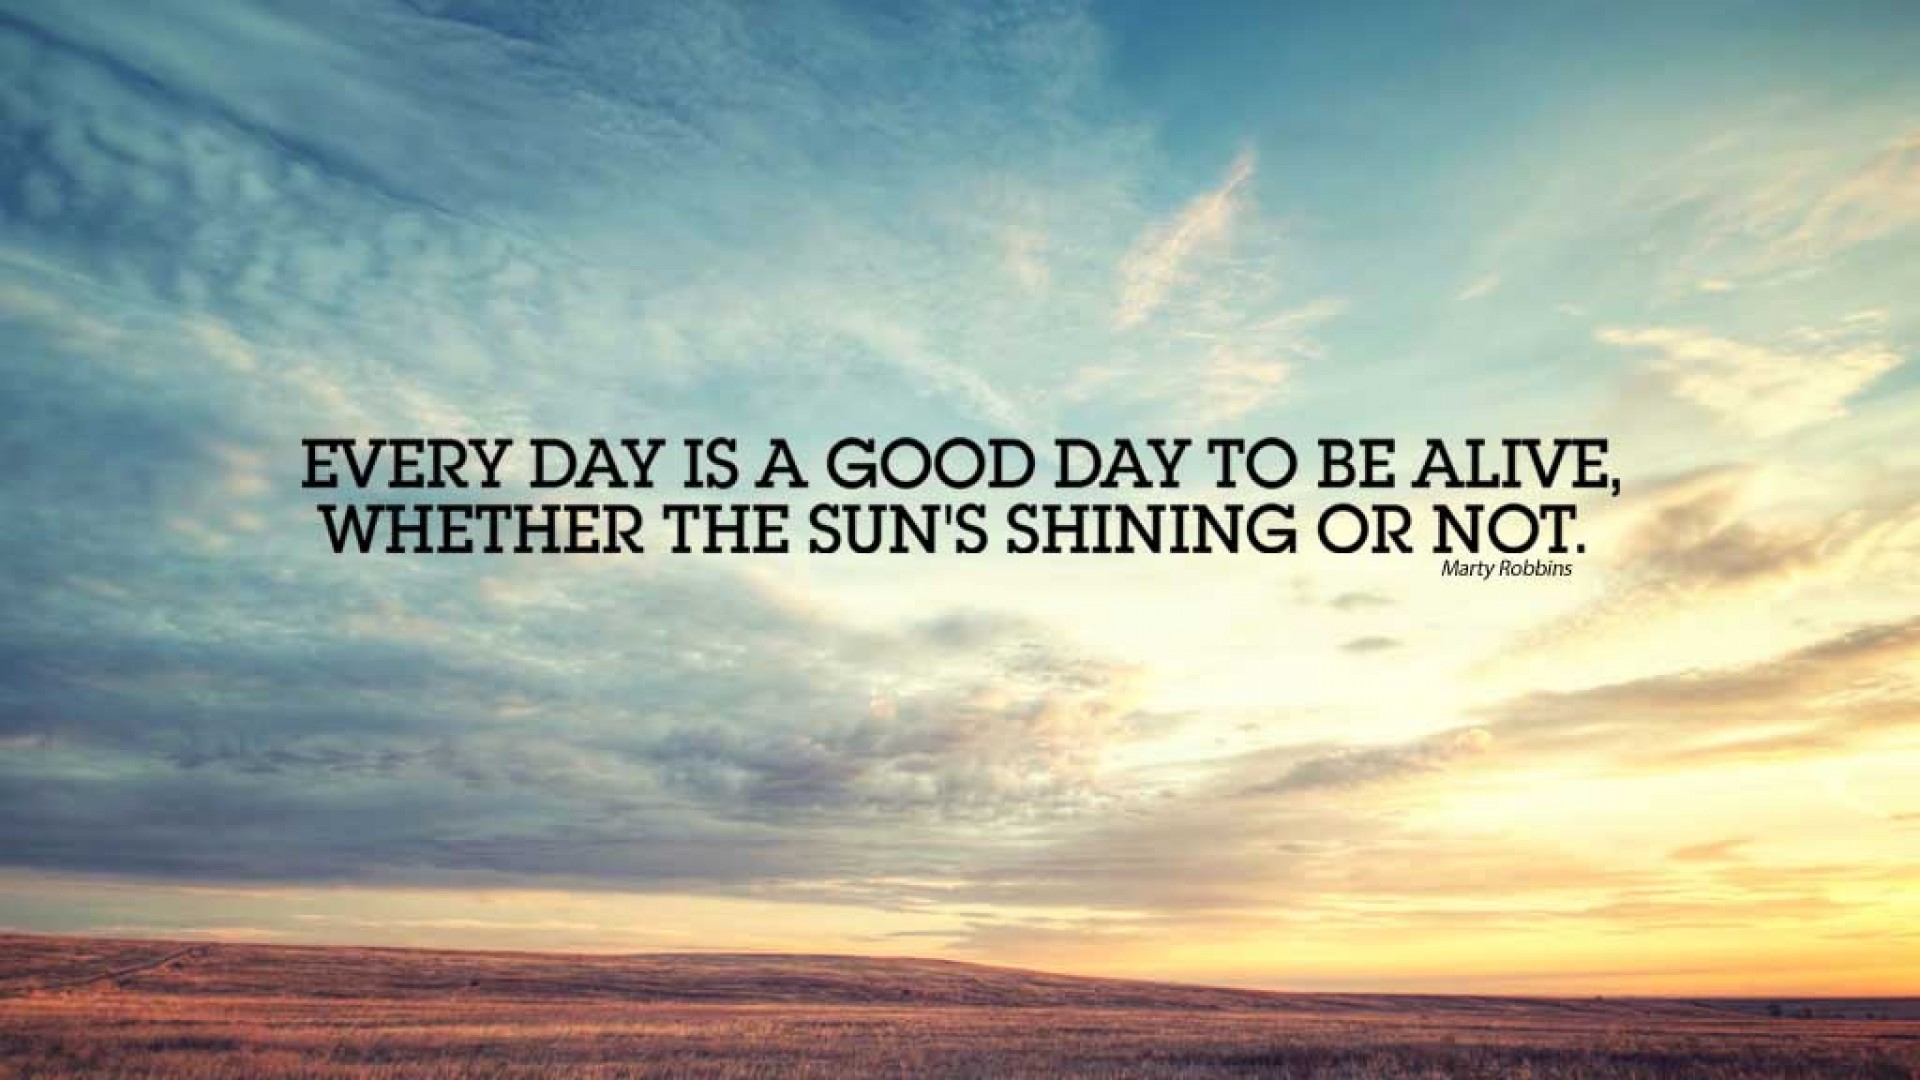 Nice good morning quote hd high resolution images | Get Latest ...